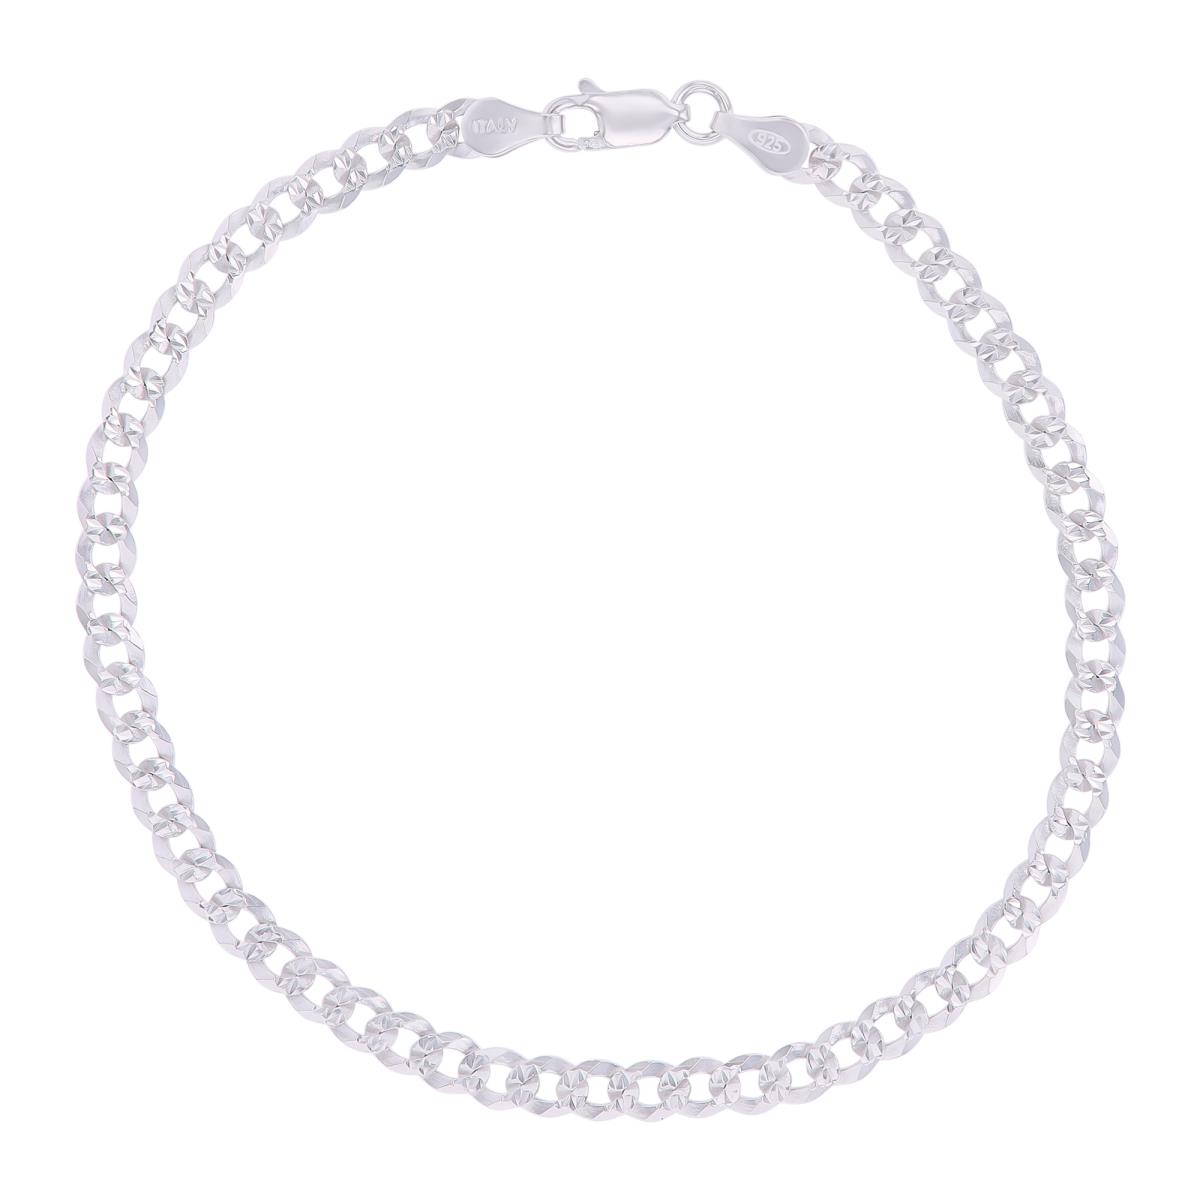 Sterling Silver Rhodium DC 4mm 100 Curb Pave 8.25"Chain Bracelet